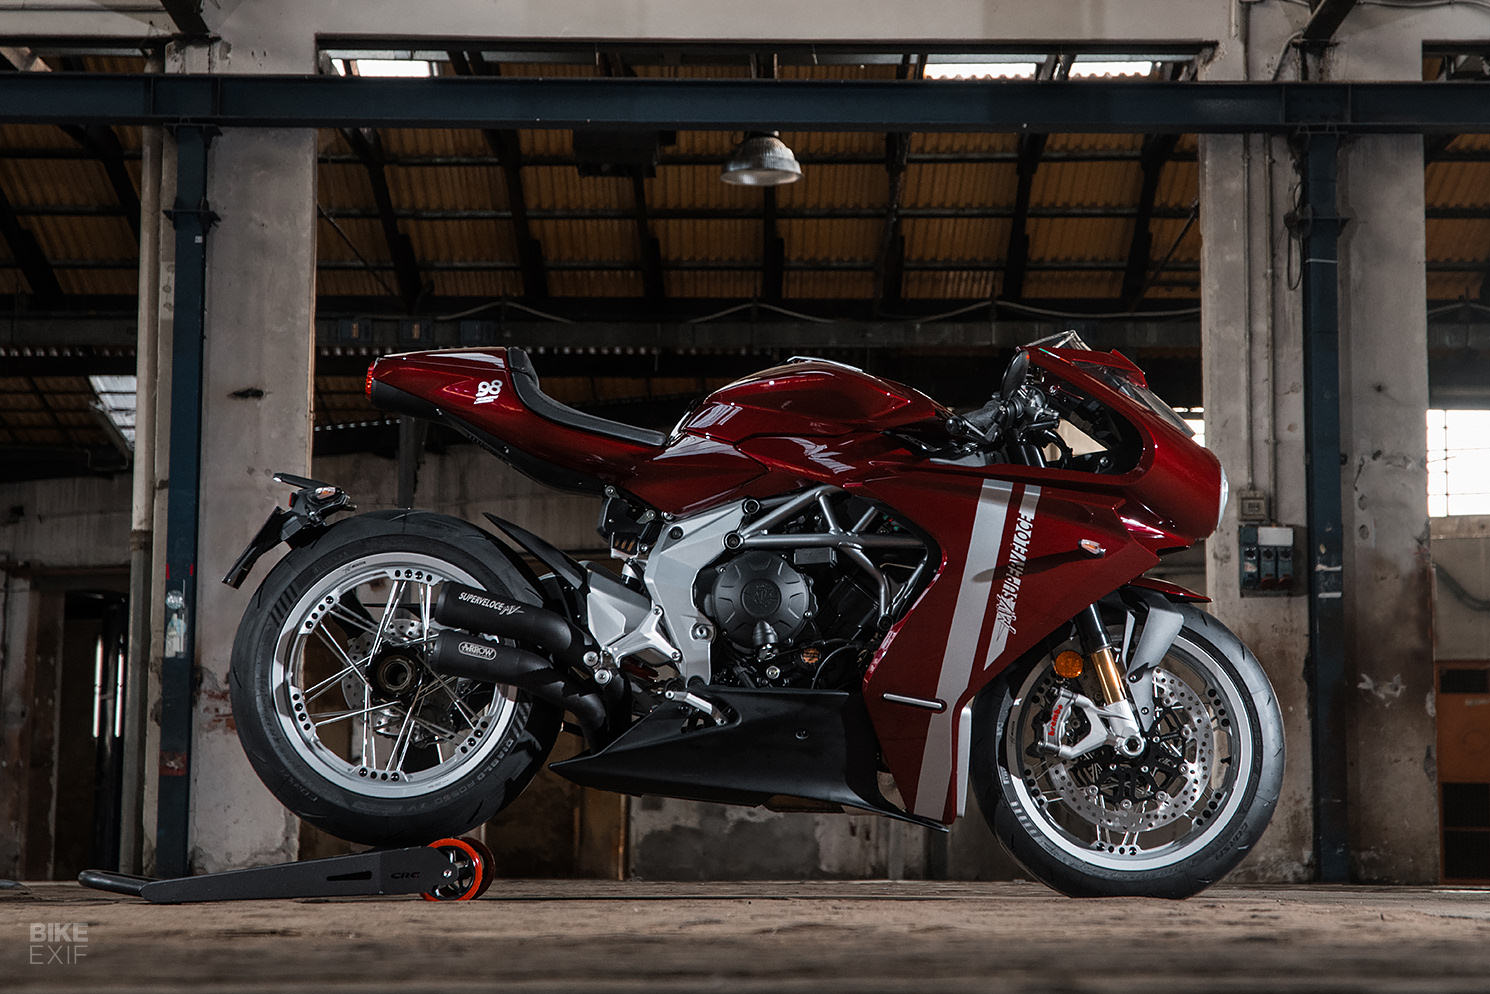 MV Agusta announce one of the rarest road bikes on the